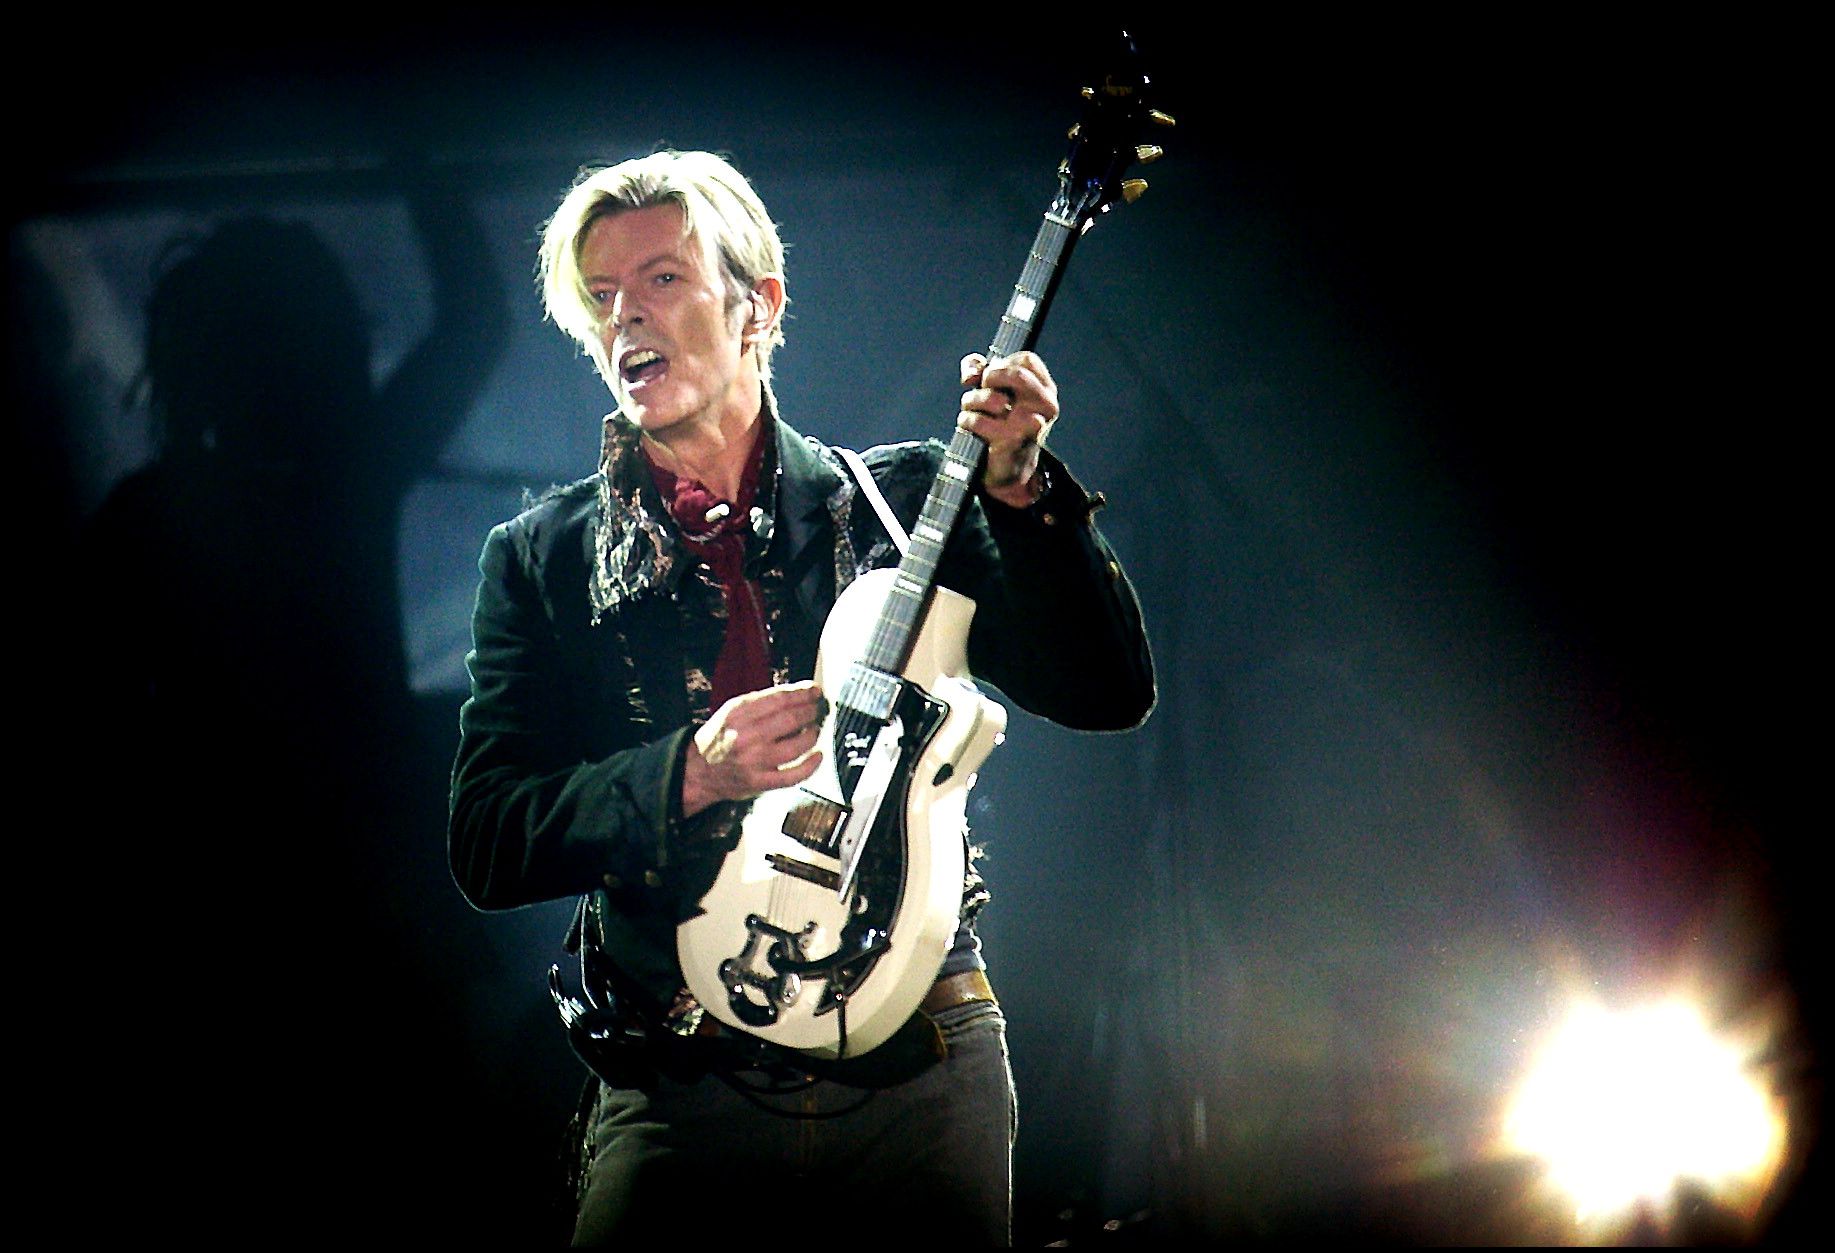 David Bowie In - David Bowie With Guitar - HD Wallpaper 